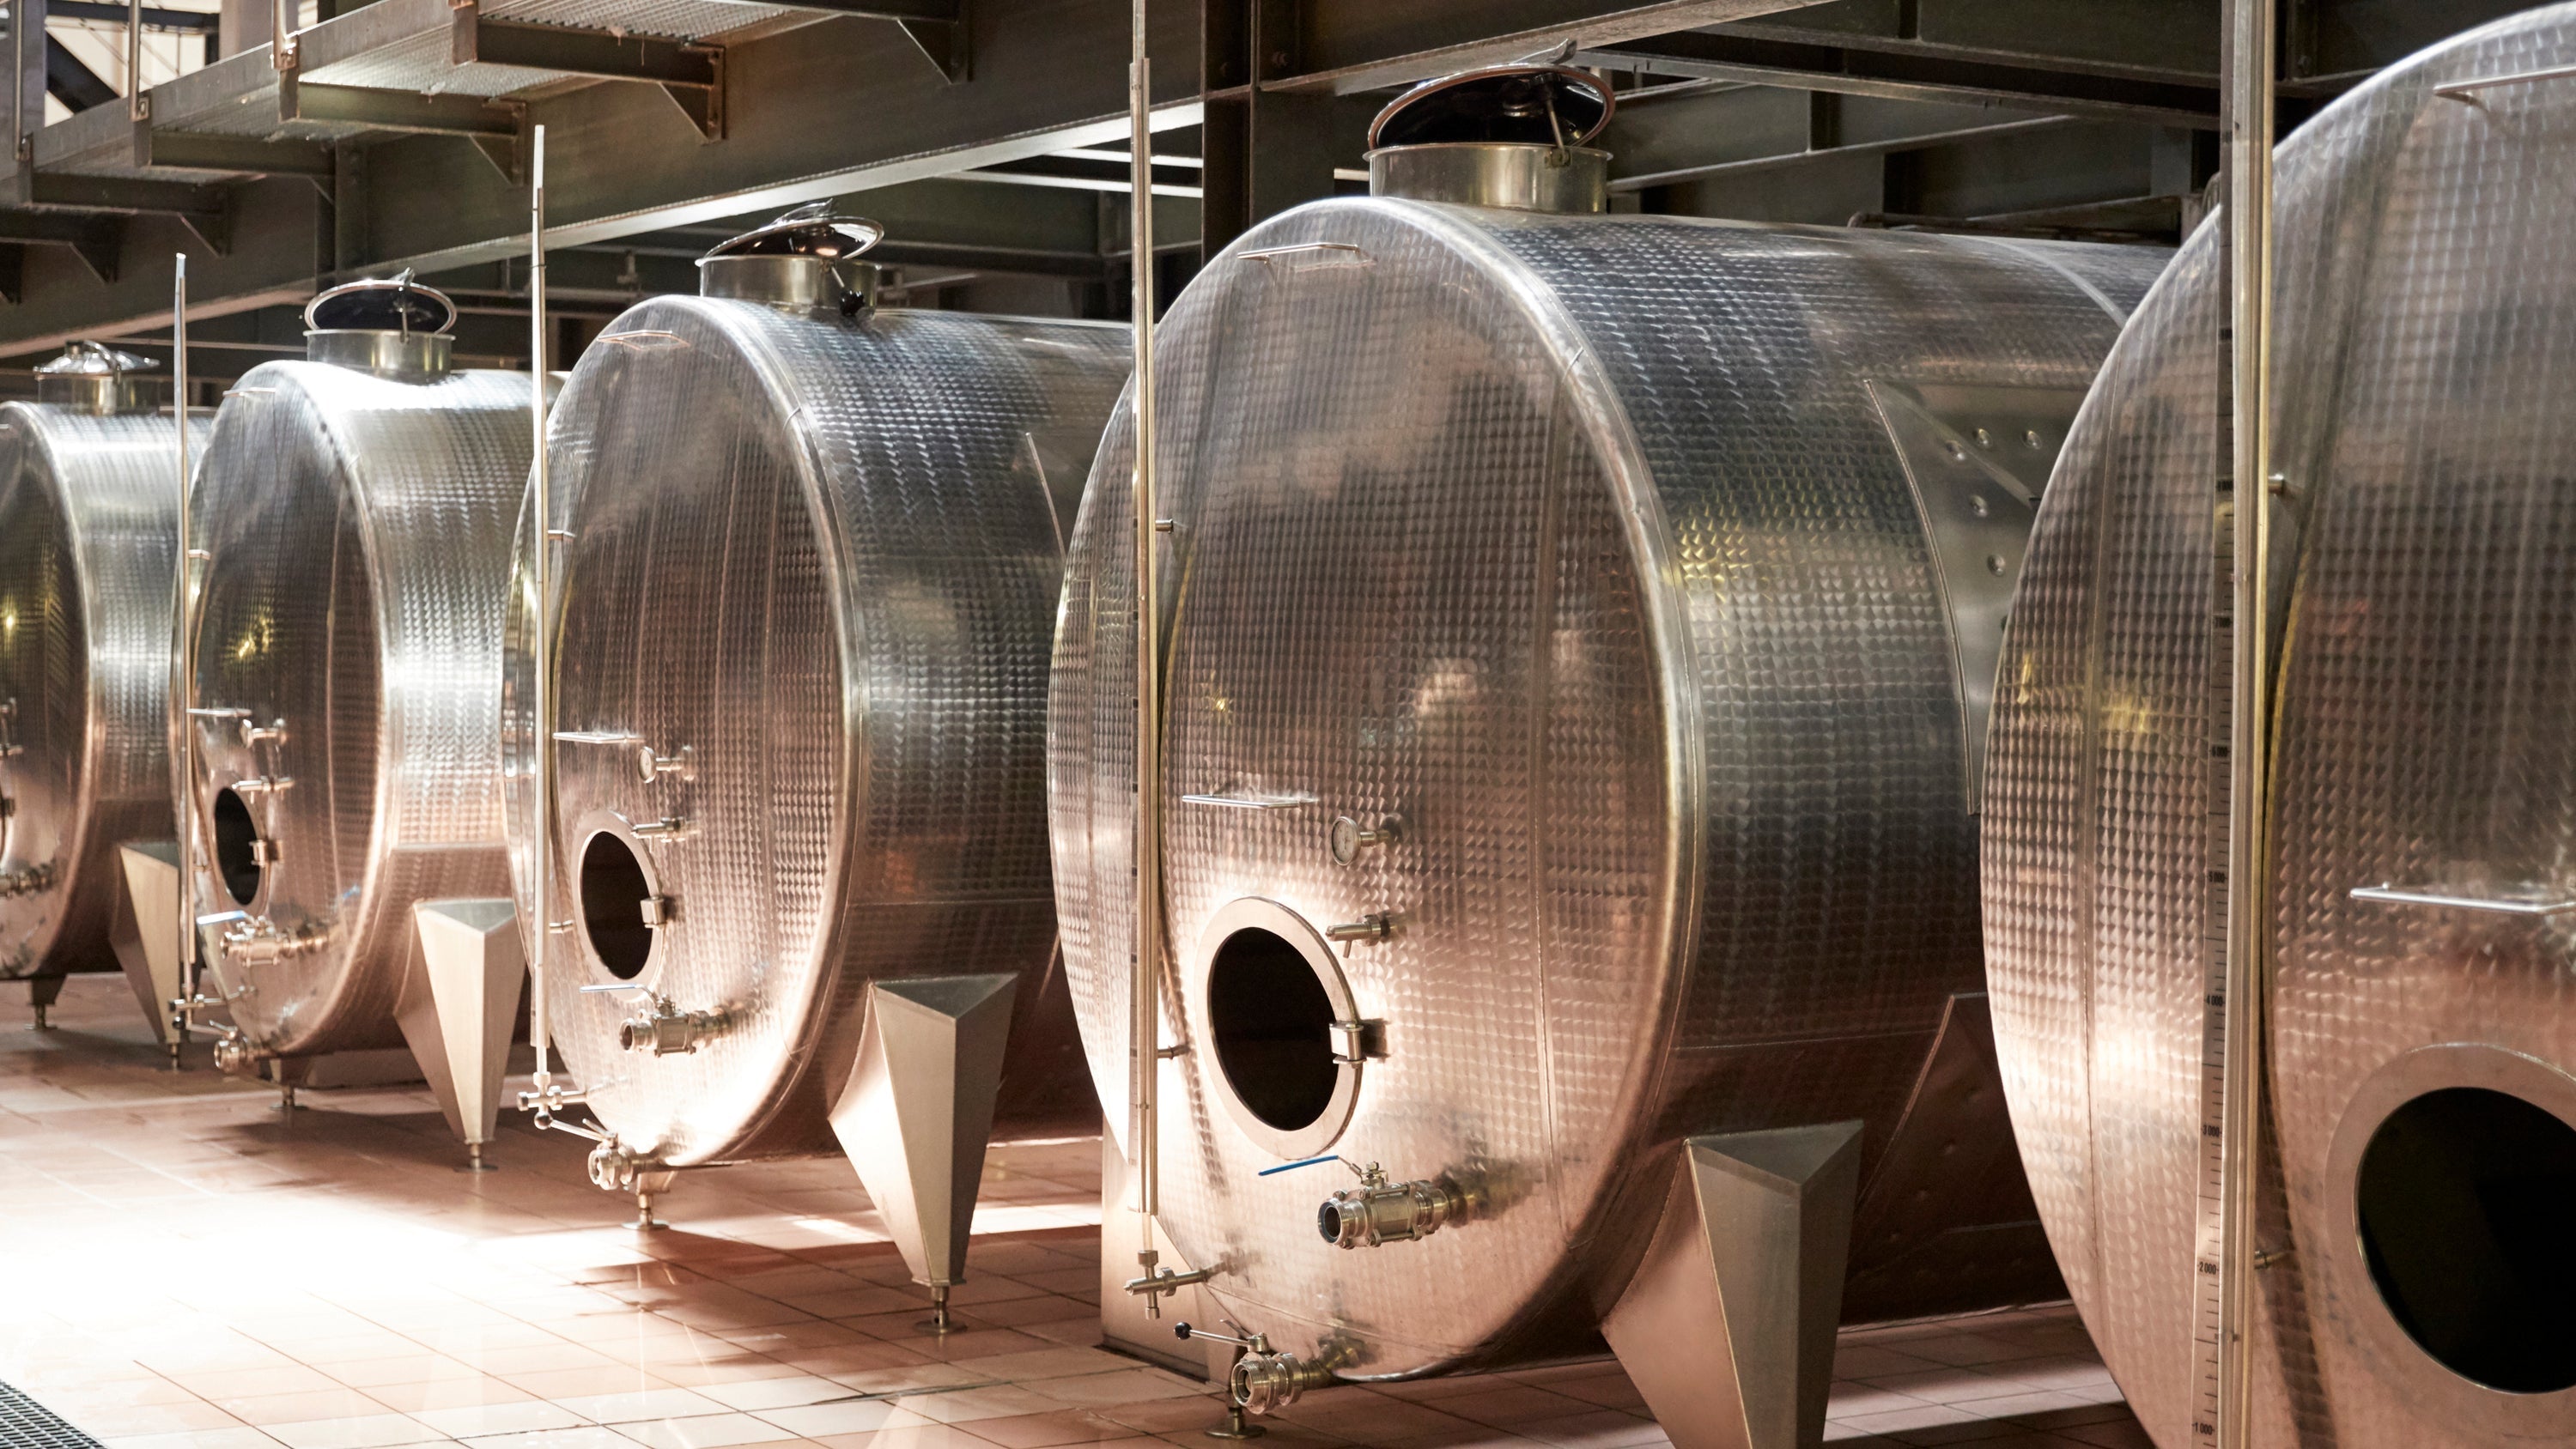 Stainless steel fermenting vessels in a winery